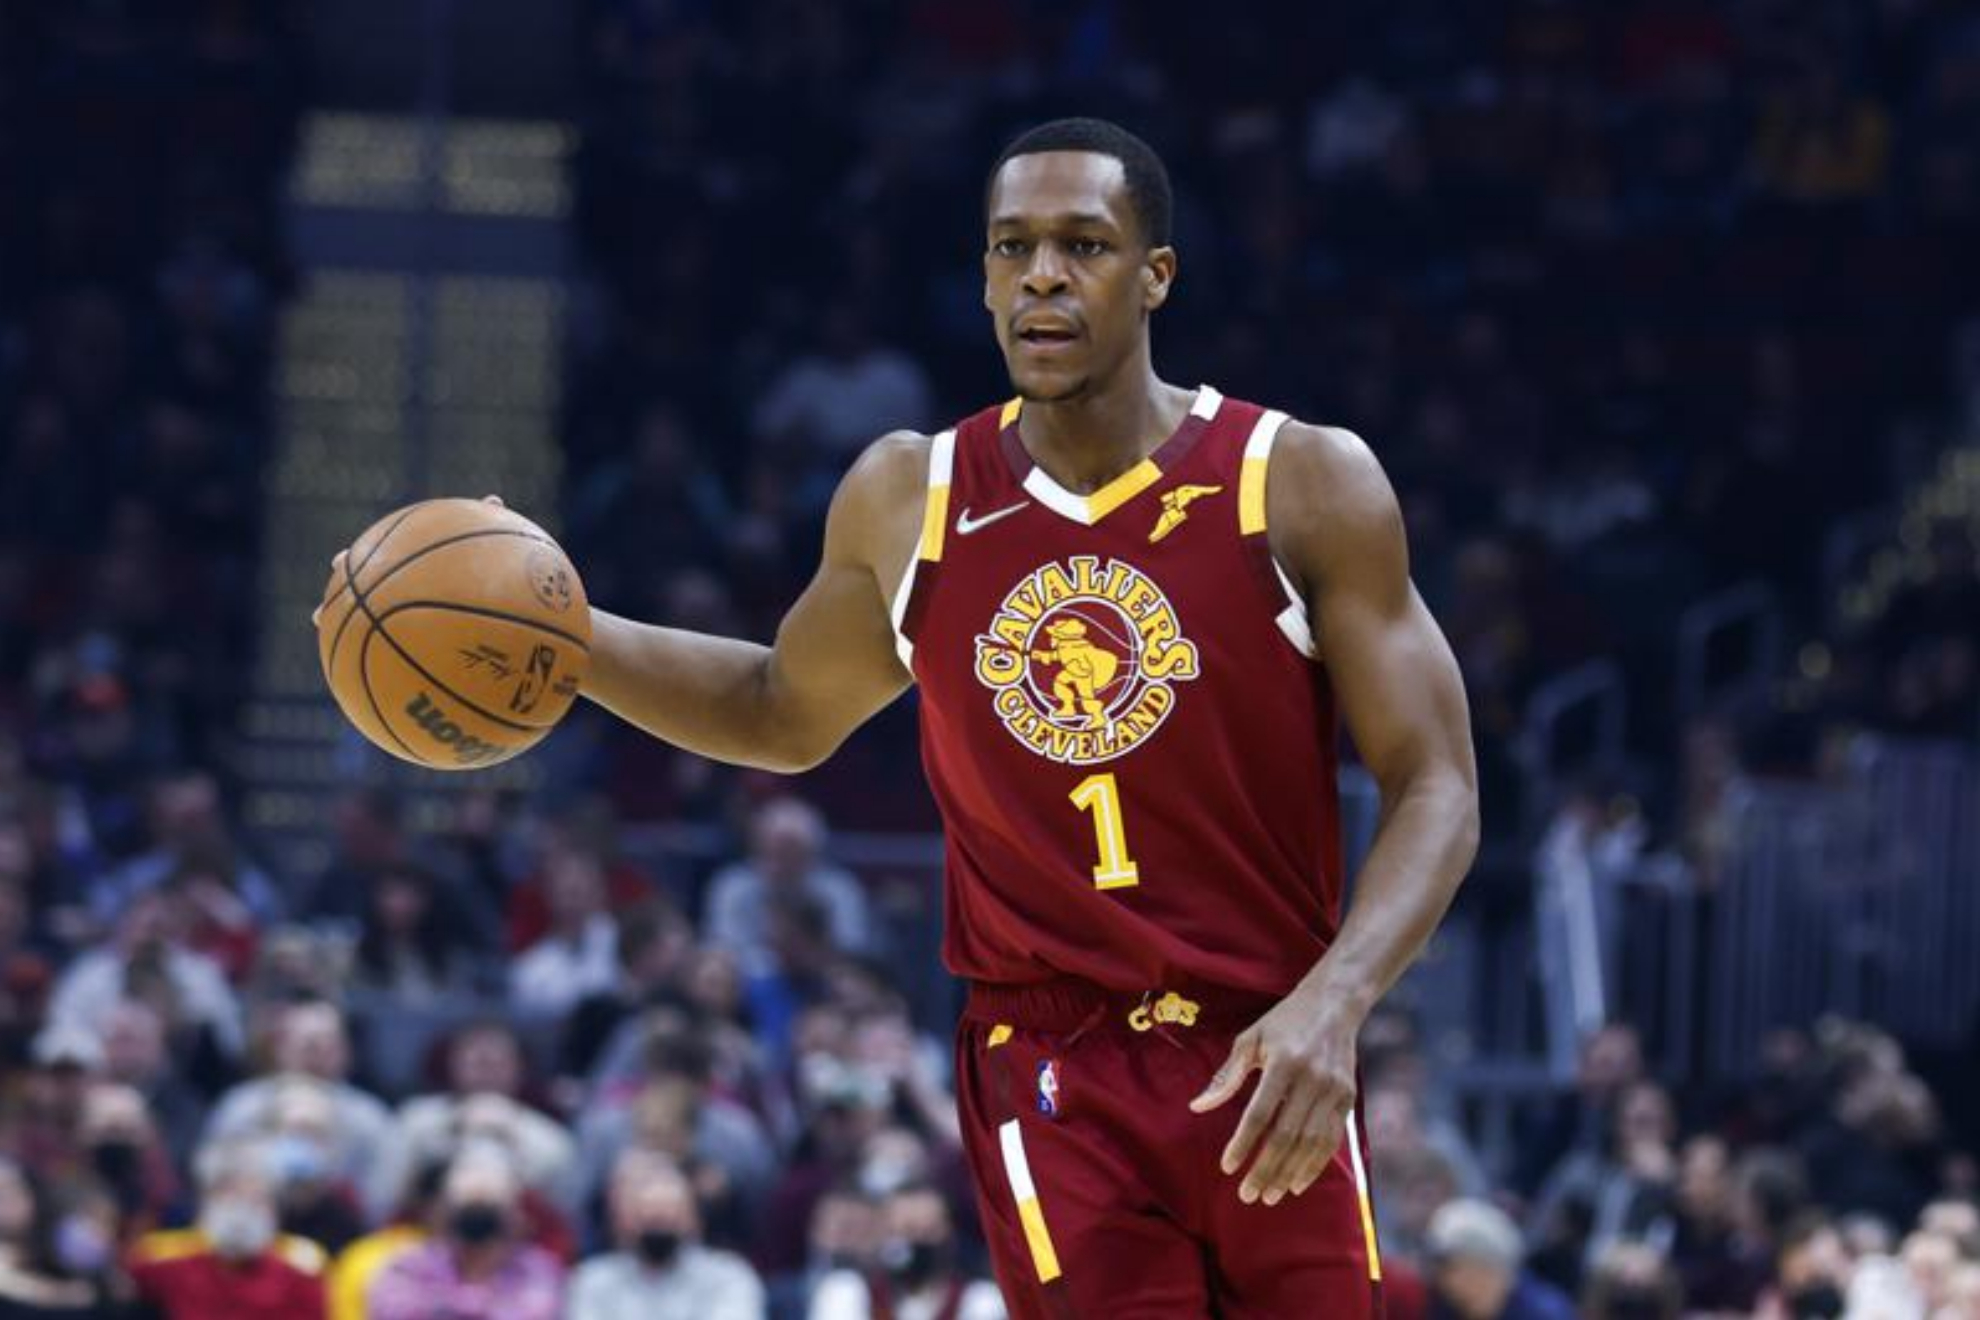 Rajon Rondo playing for the Cleveland Cavaliers. - AP Photo/Ron Schwane